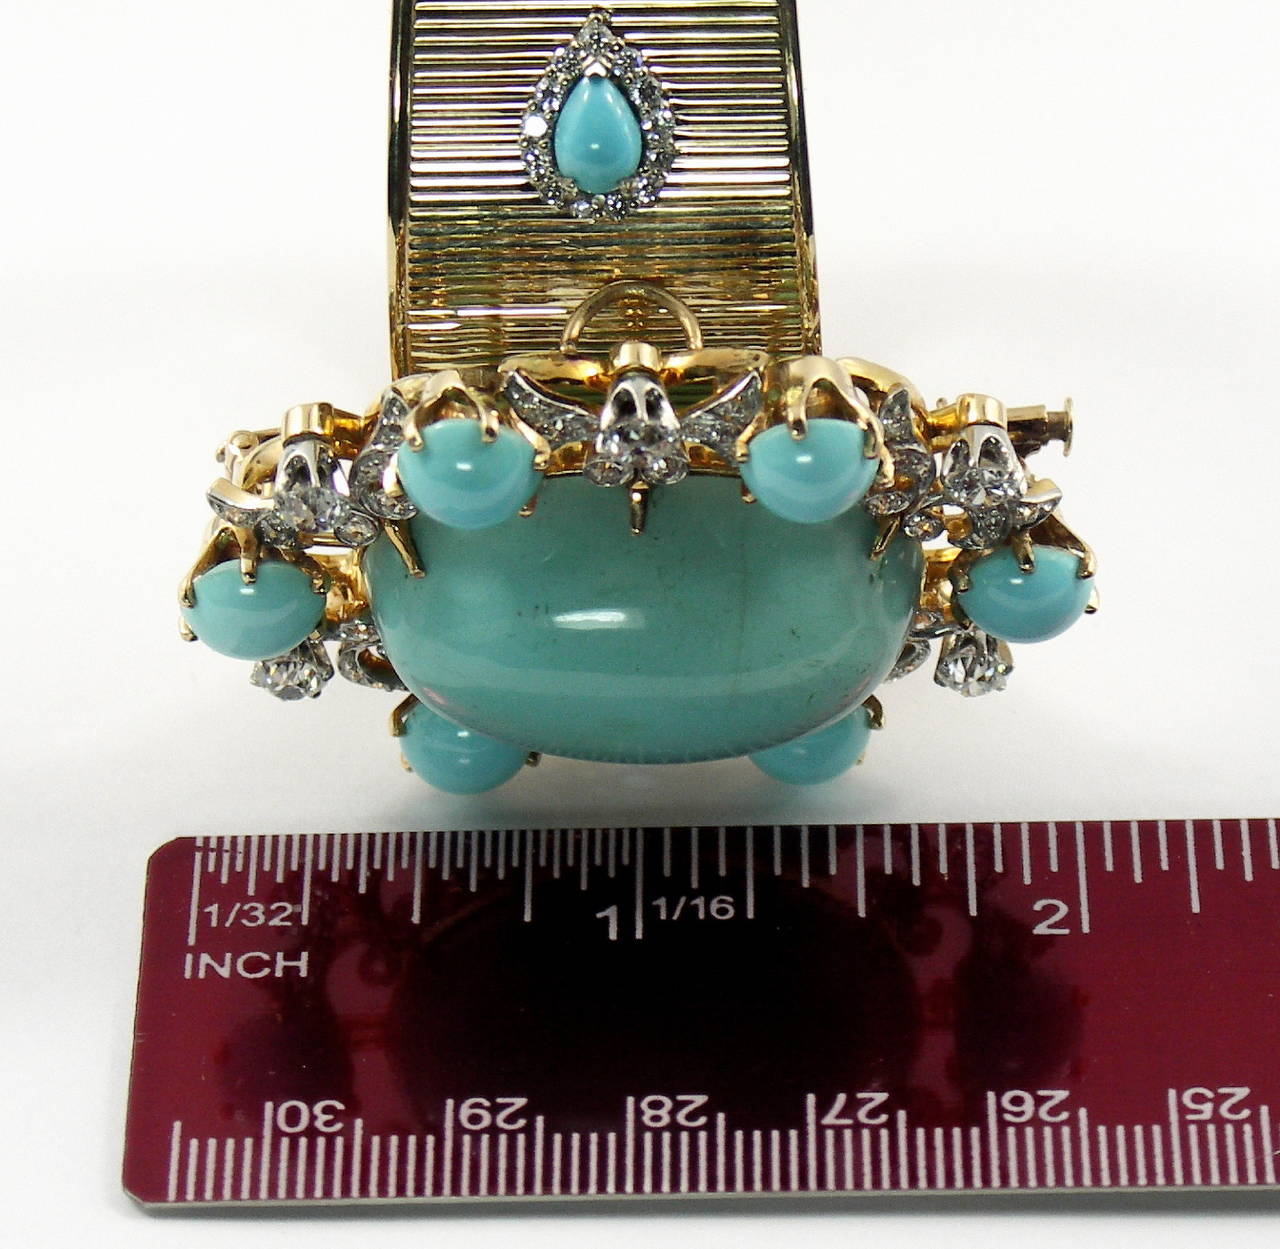 Women's Turquoise Diamond Brooch and Bracelet Combination